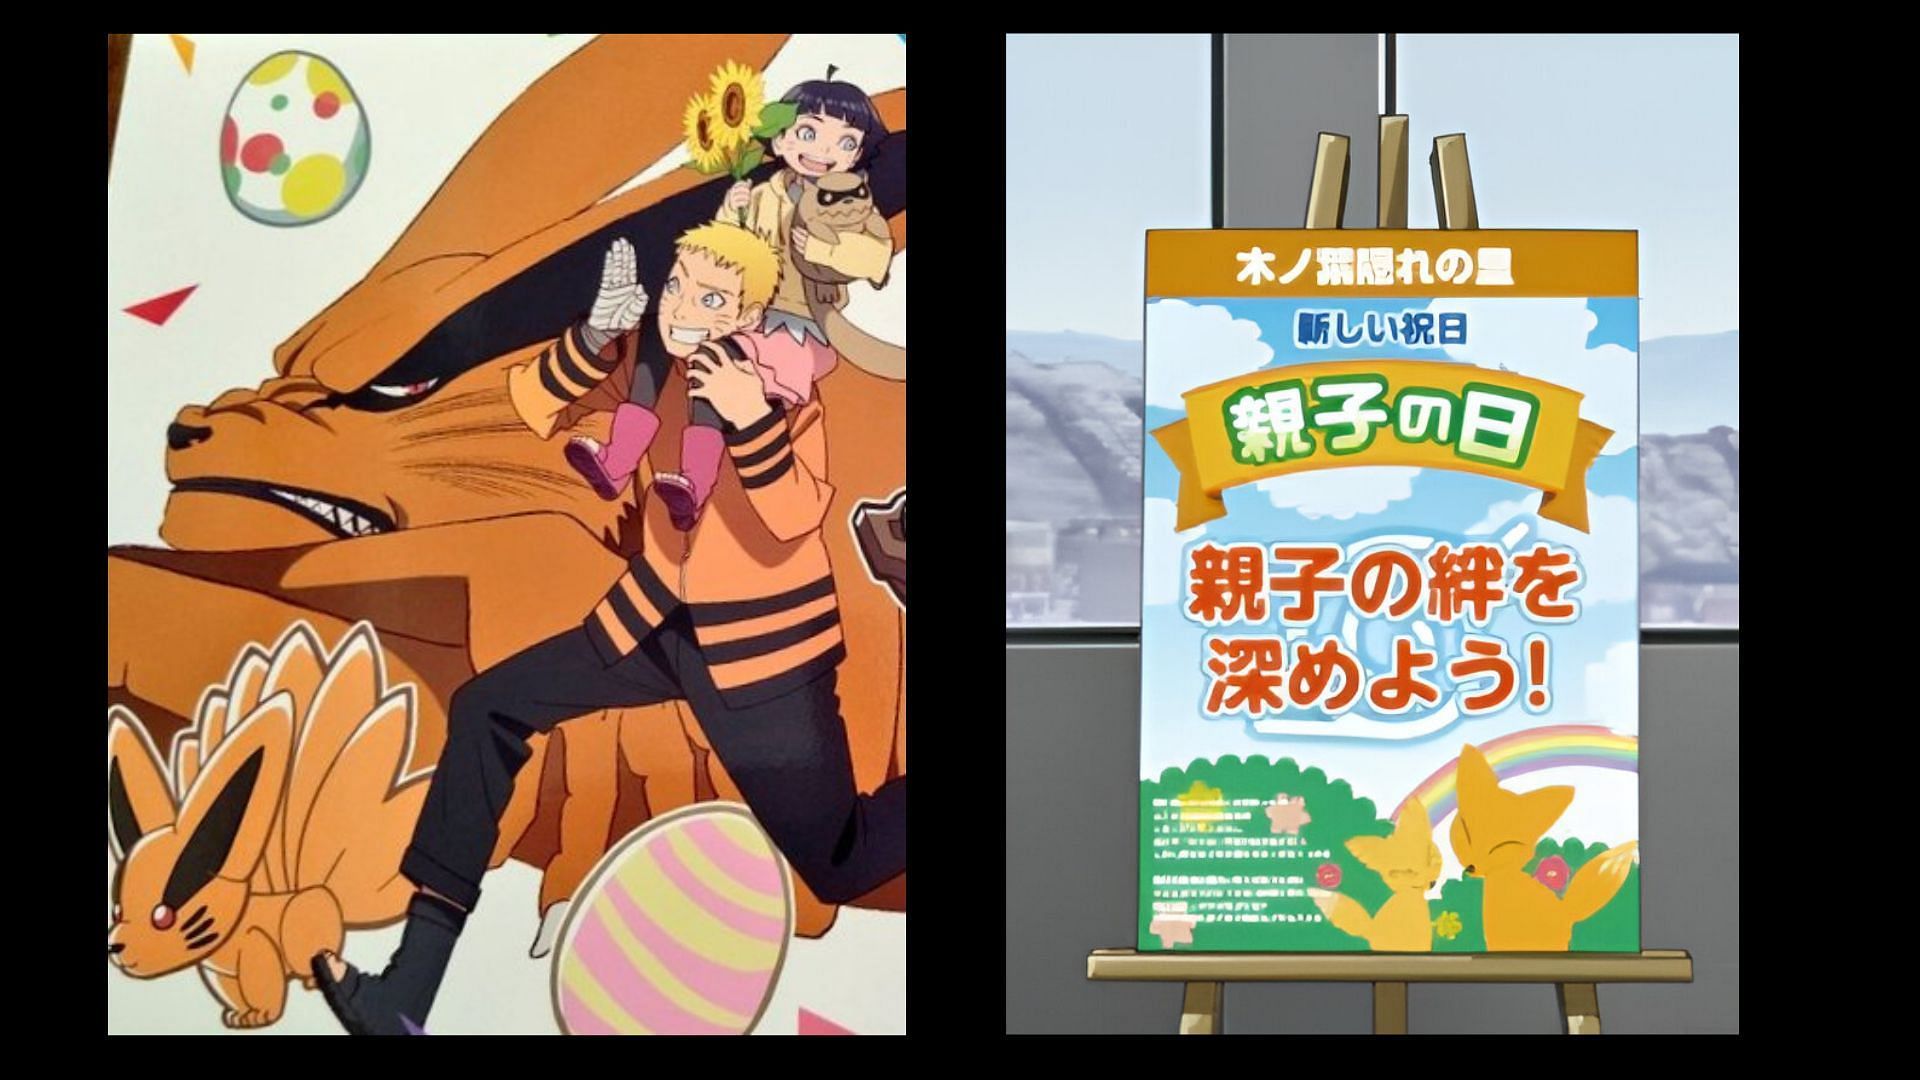 Parent and Child Day Arc visual and pamphlet in the anime (Image via Studio Pierrot)